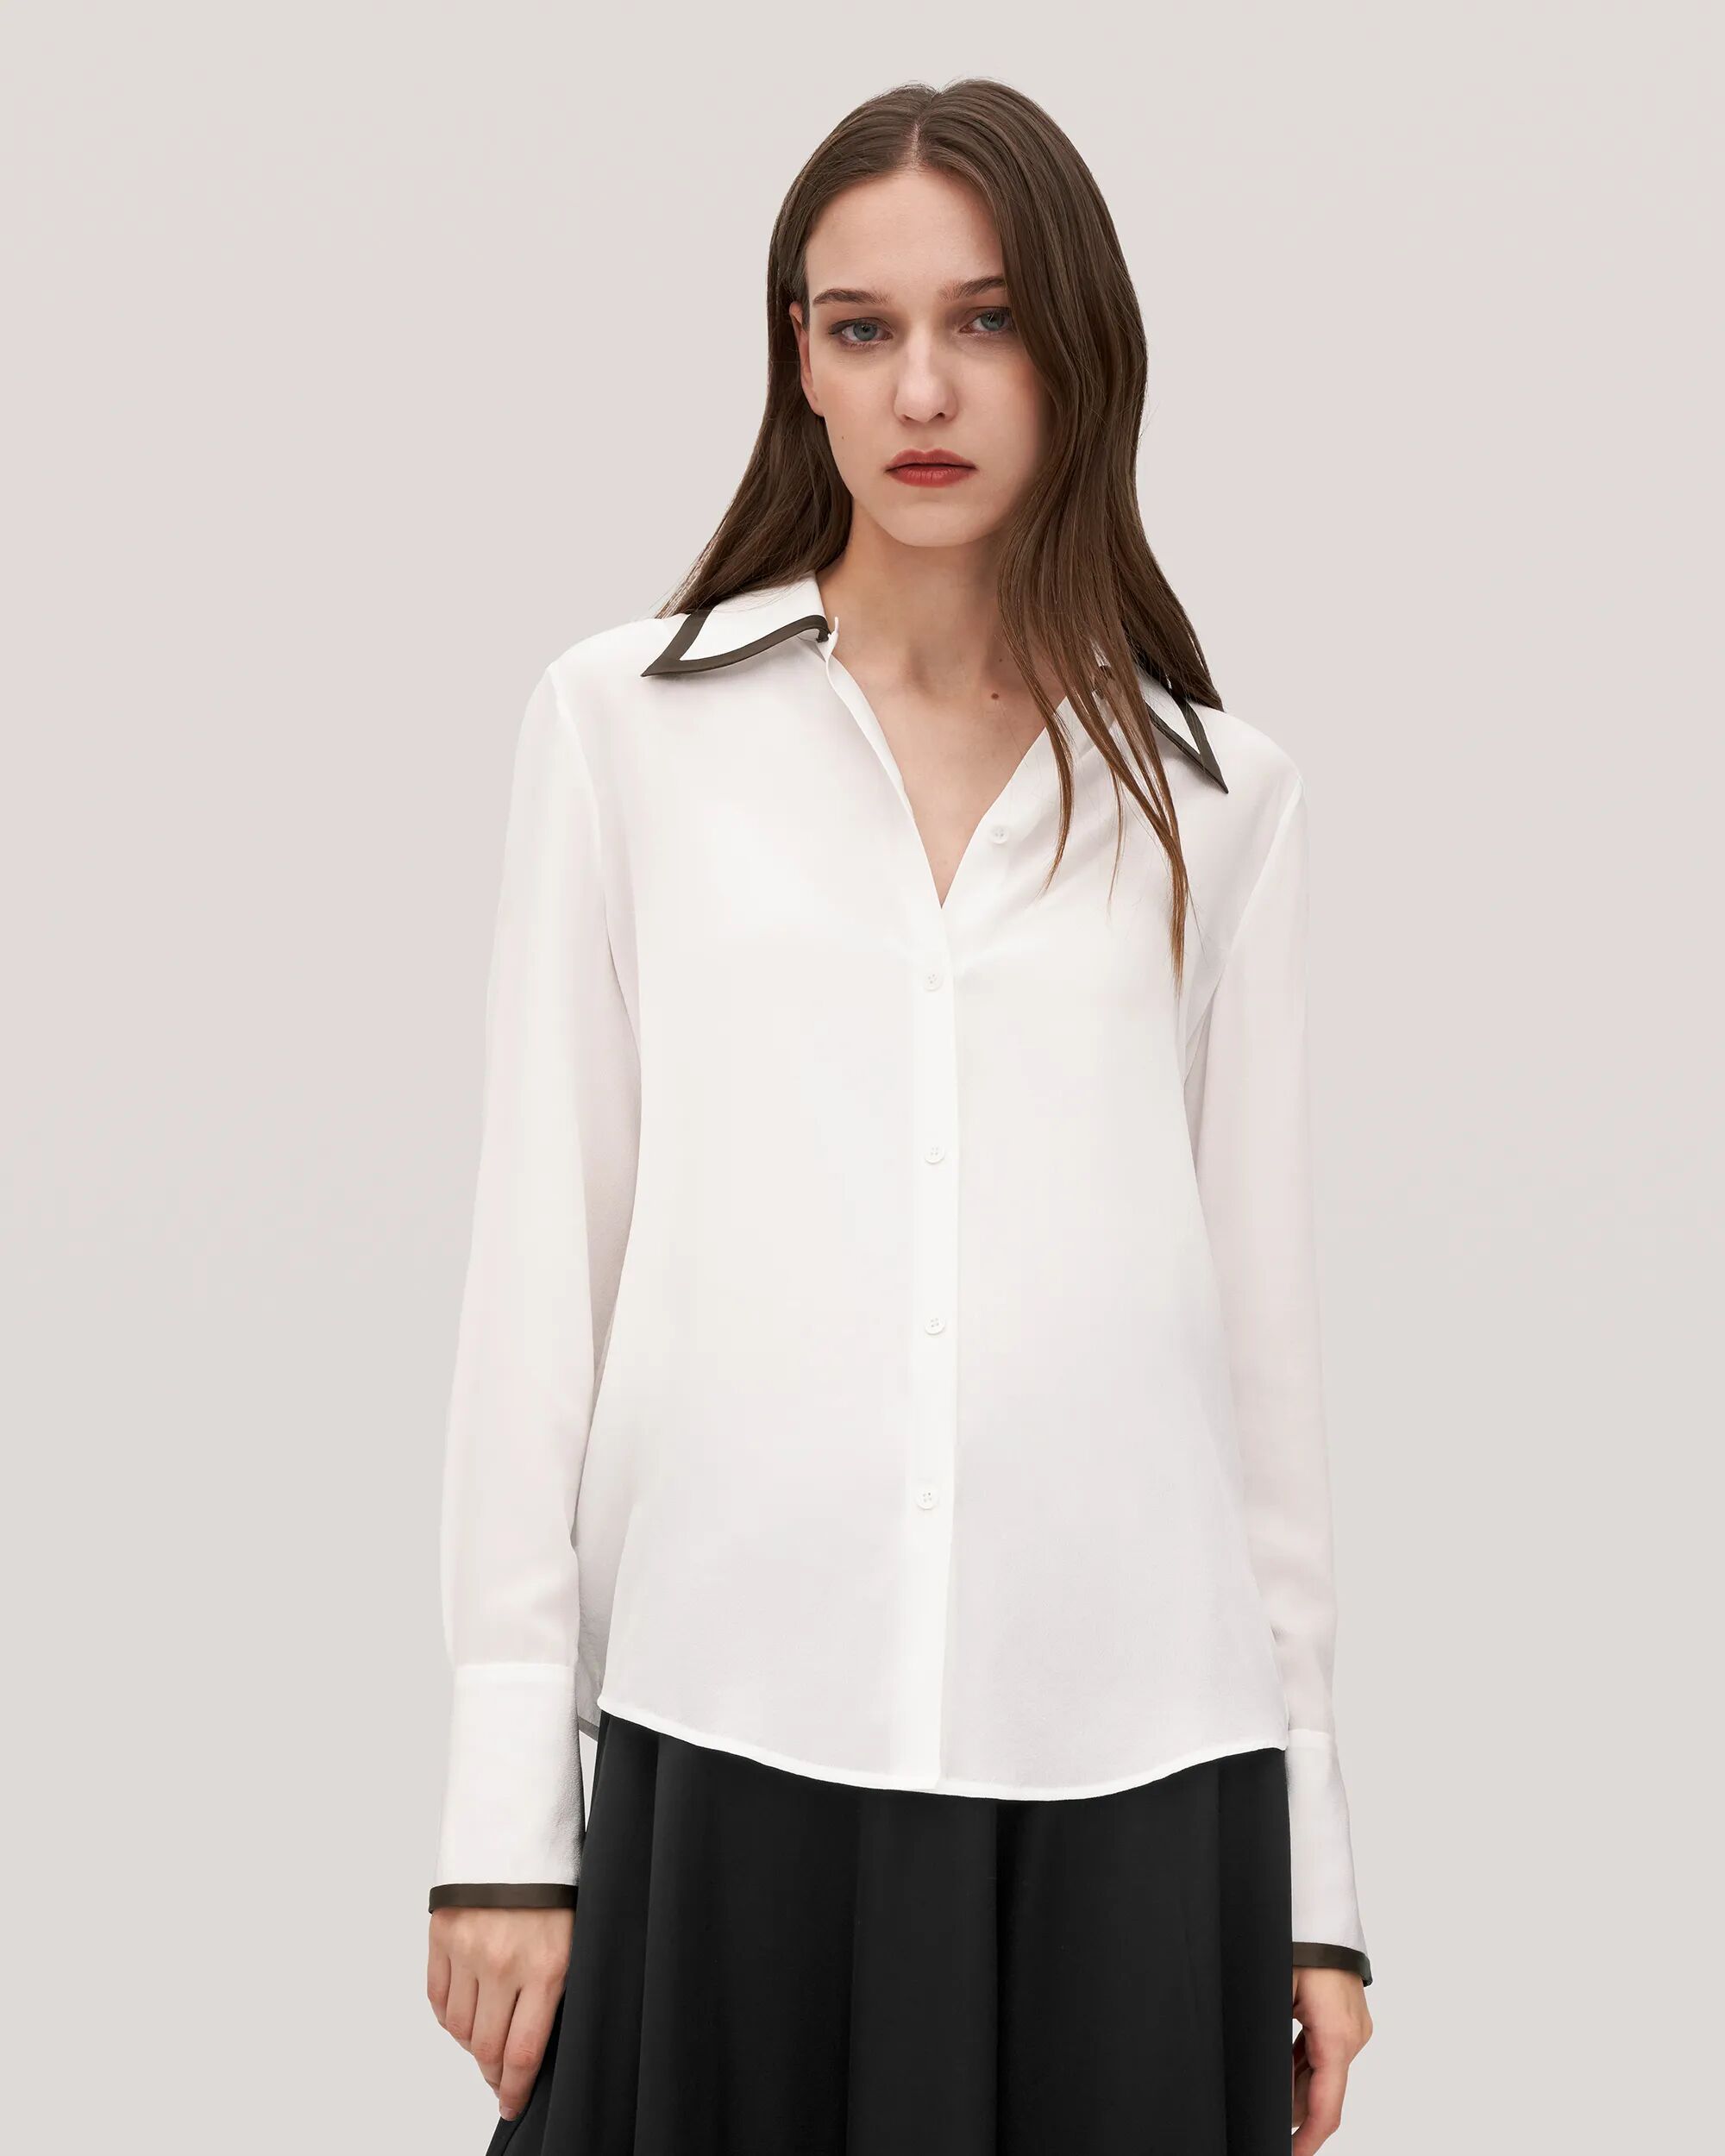 LILYSILK Business White Shirt With A Black Collar And Cuffs   Silk Striped   Blouse Women Wrinkle-Resistant Contrasting Trim Oeko-Tex Certified S